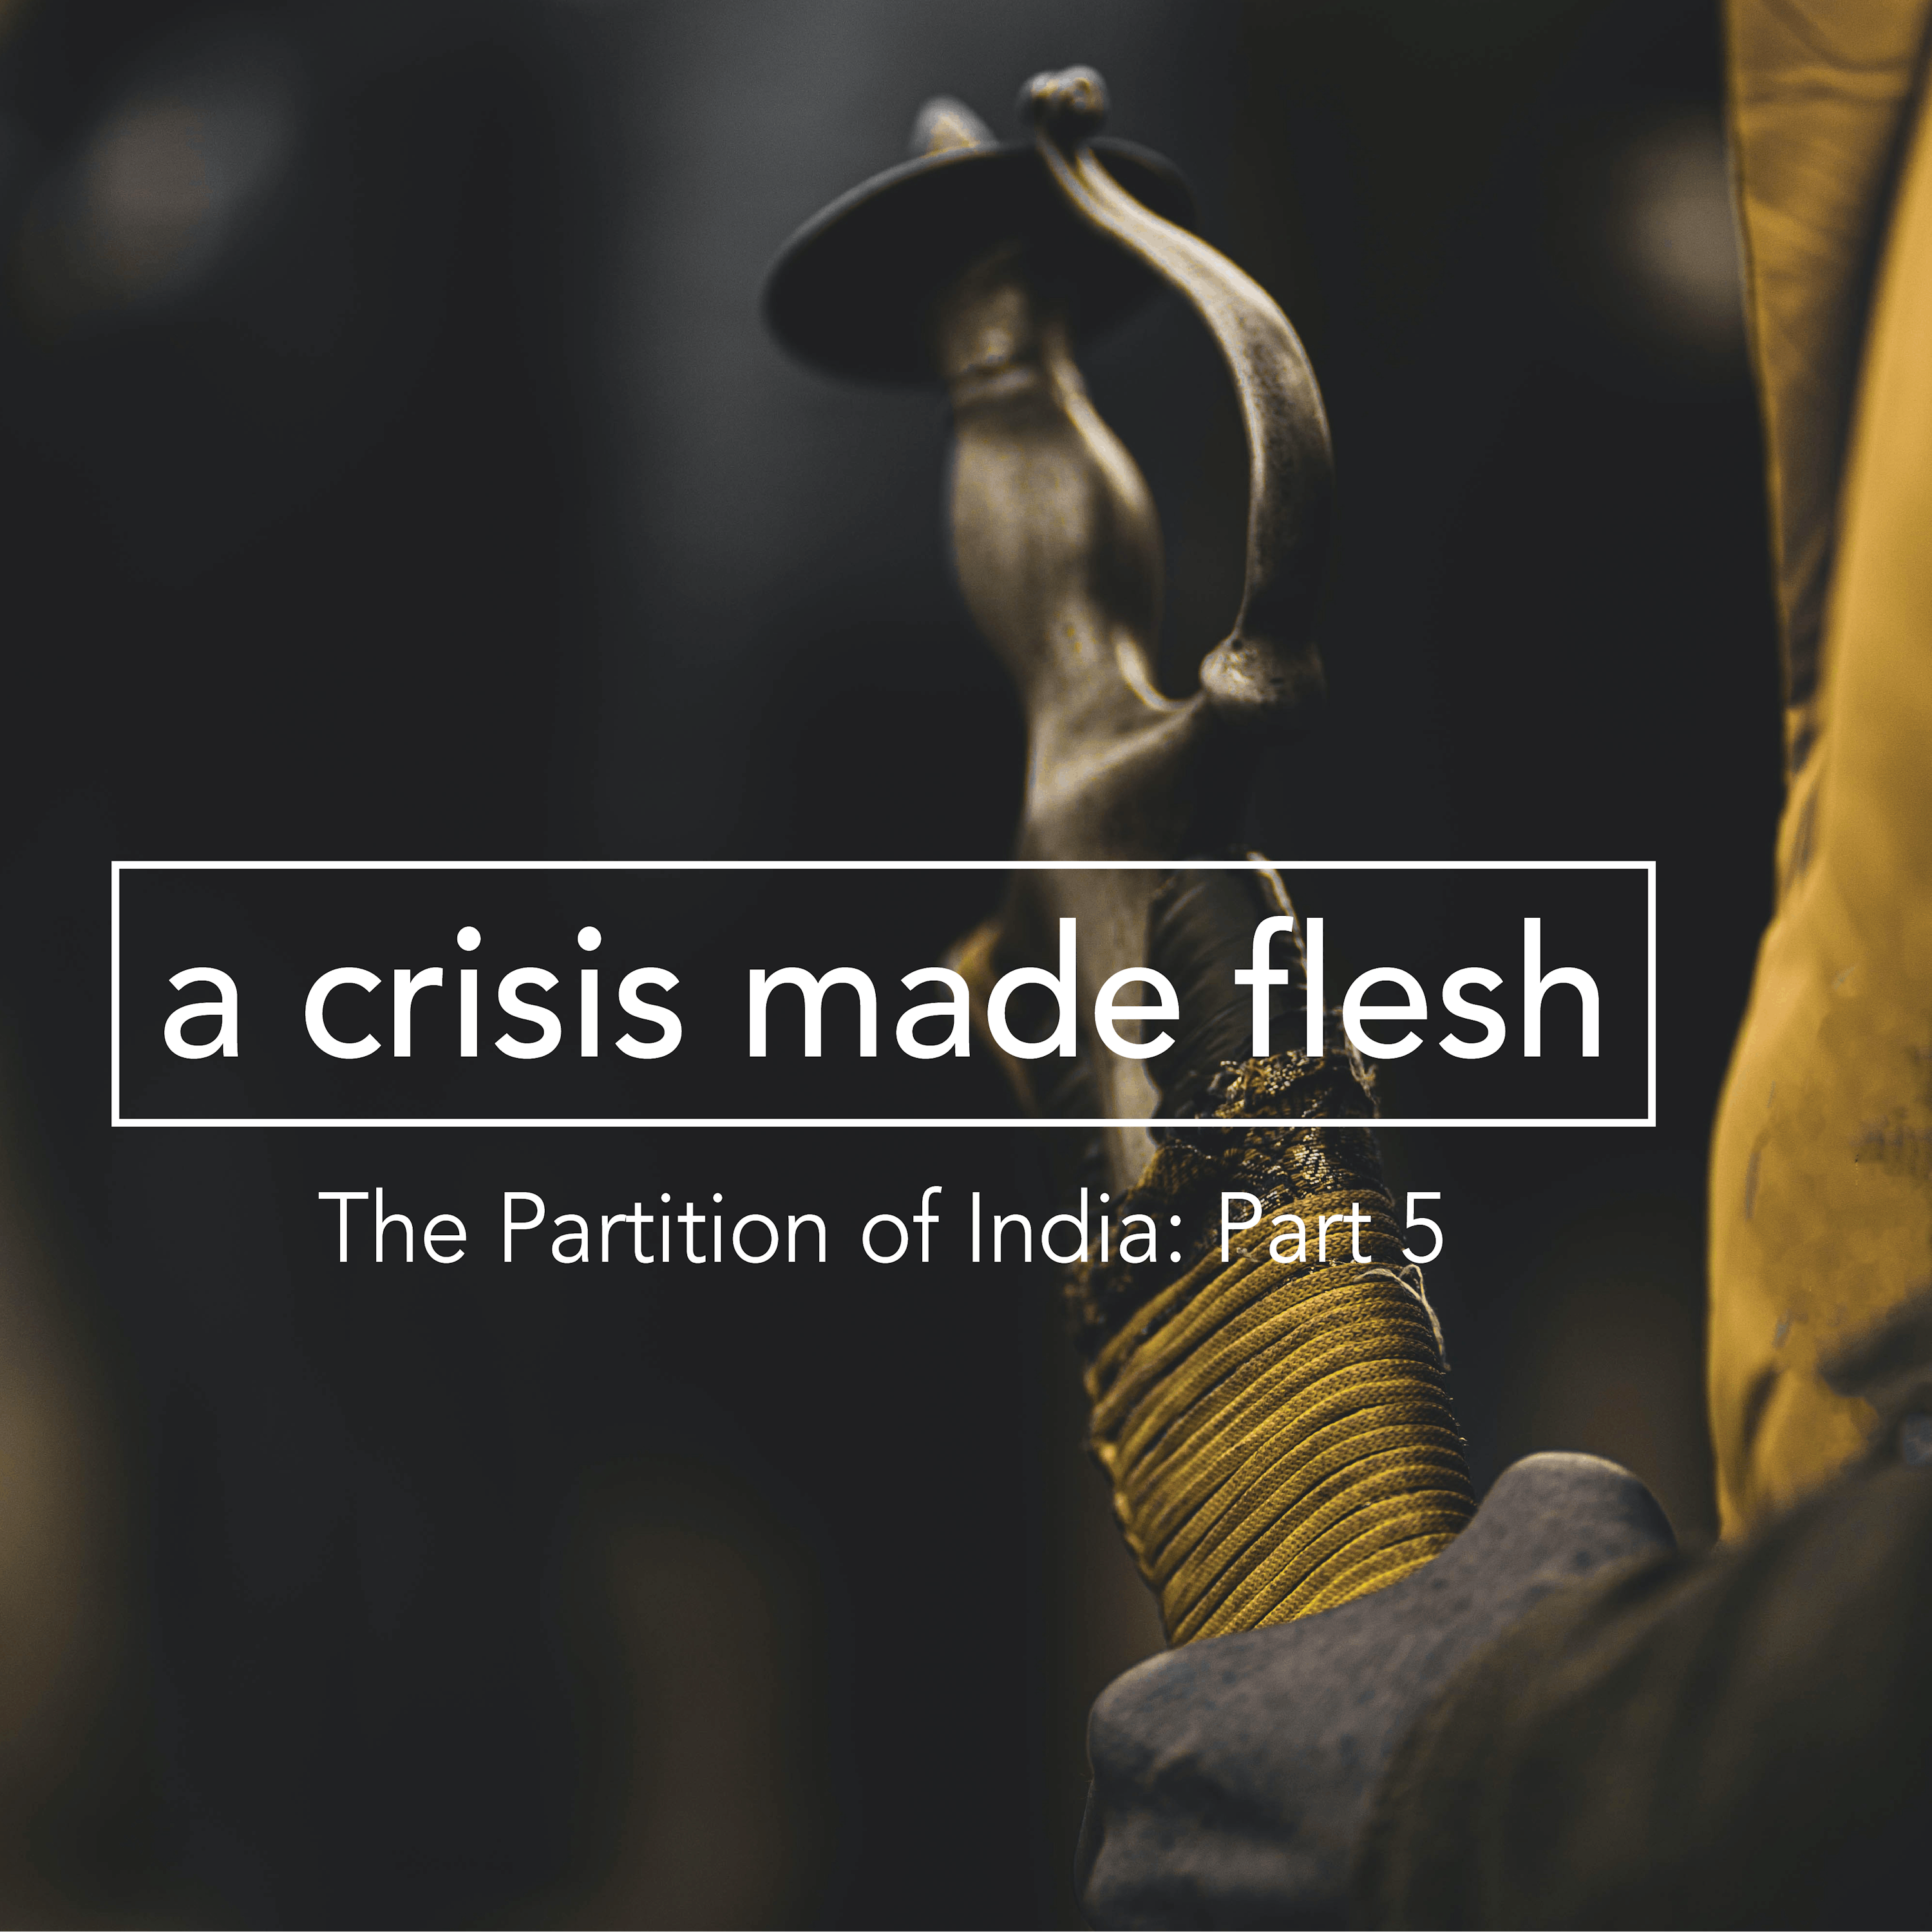 The Partition of India – Part 5: A Crisis Made Flesh Image